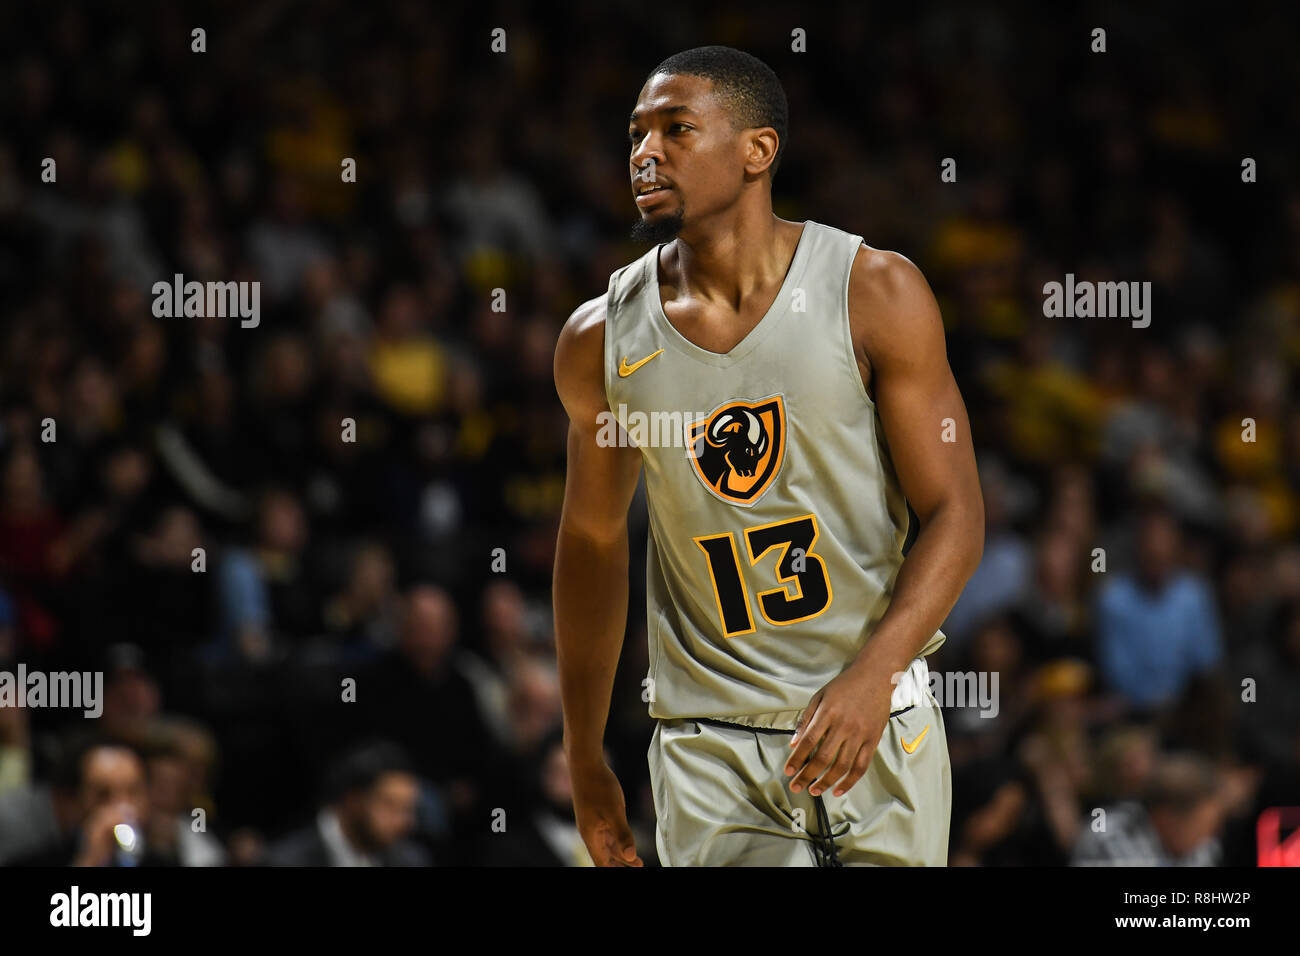 Richmond, VA, USA. 15th Dec, 2018. MALIK CROWFIELD (13) in action during the game held at the E.J. Wade Arena in Richmond, Virginia. Credit: Amy Sanderson/ZUMA Wire/Alamy Live News Stock Photo